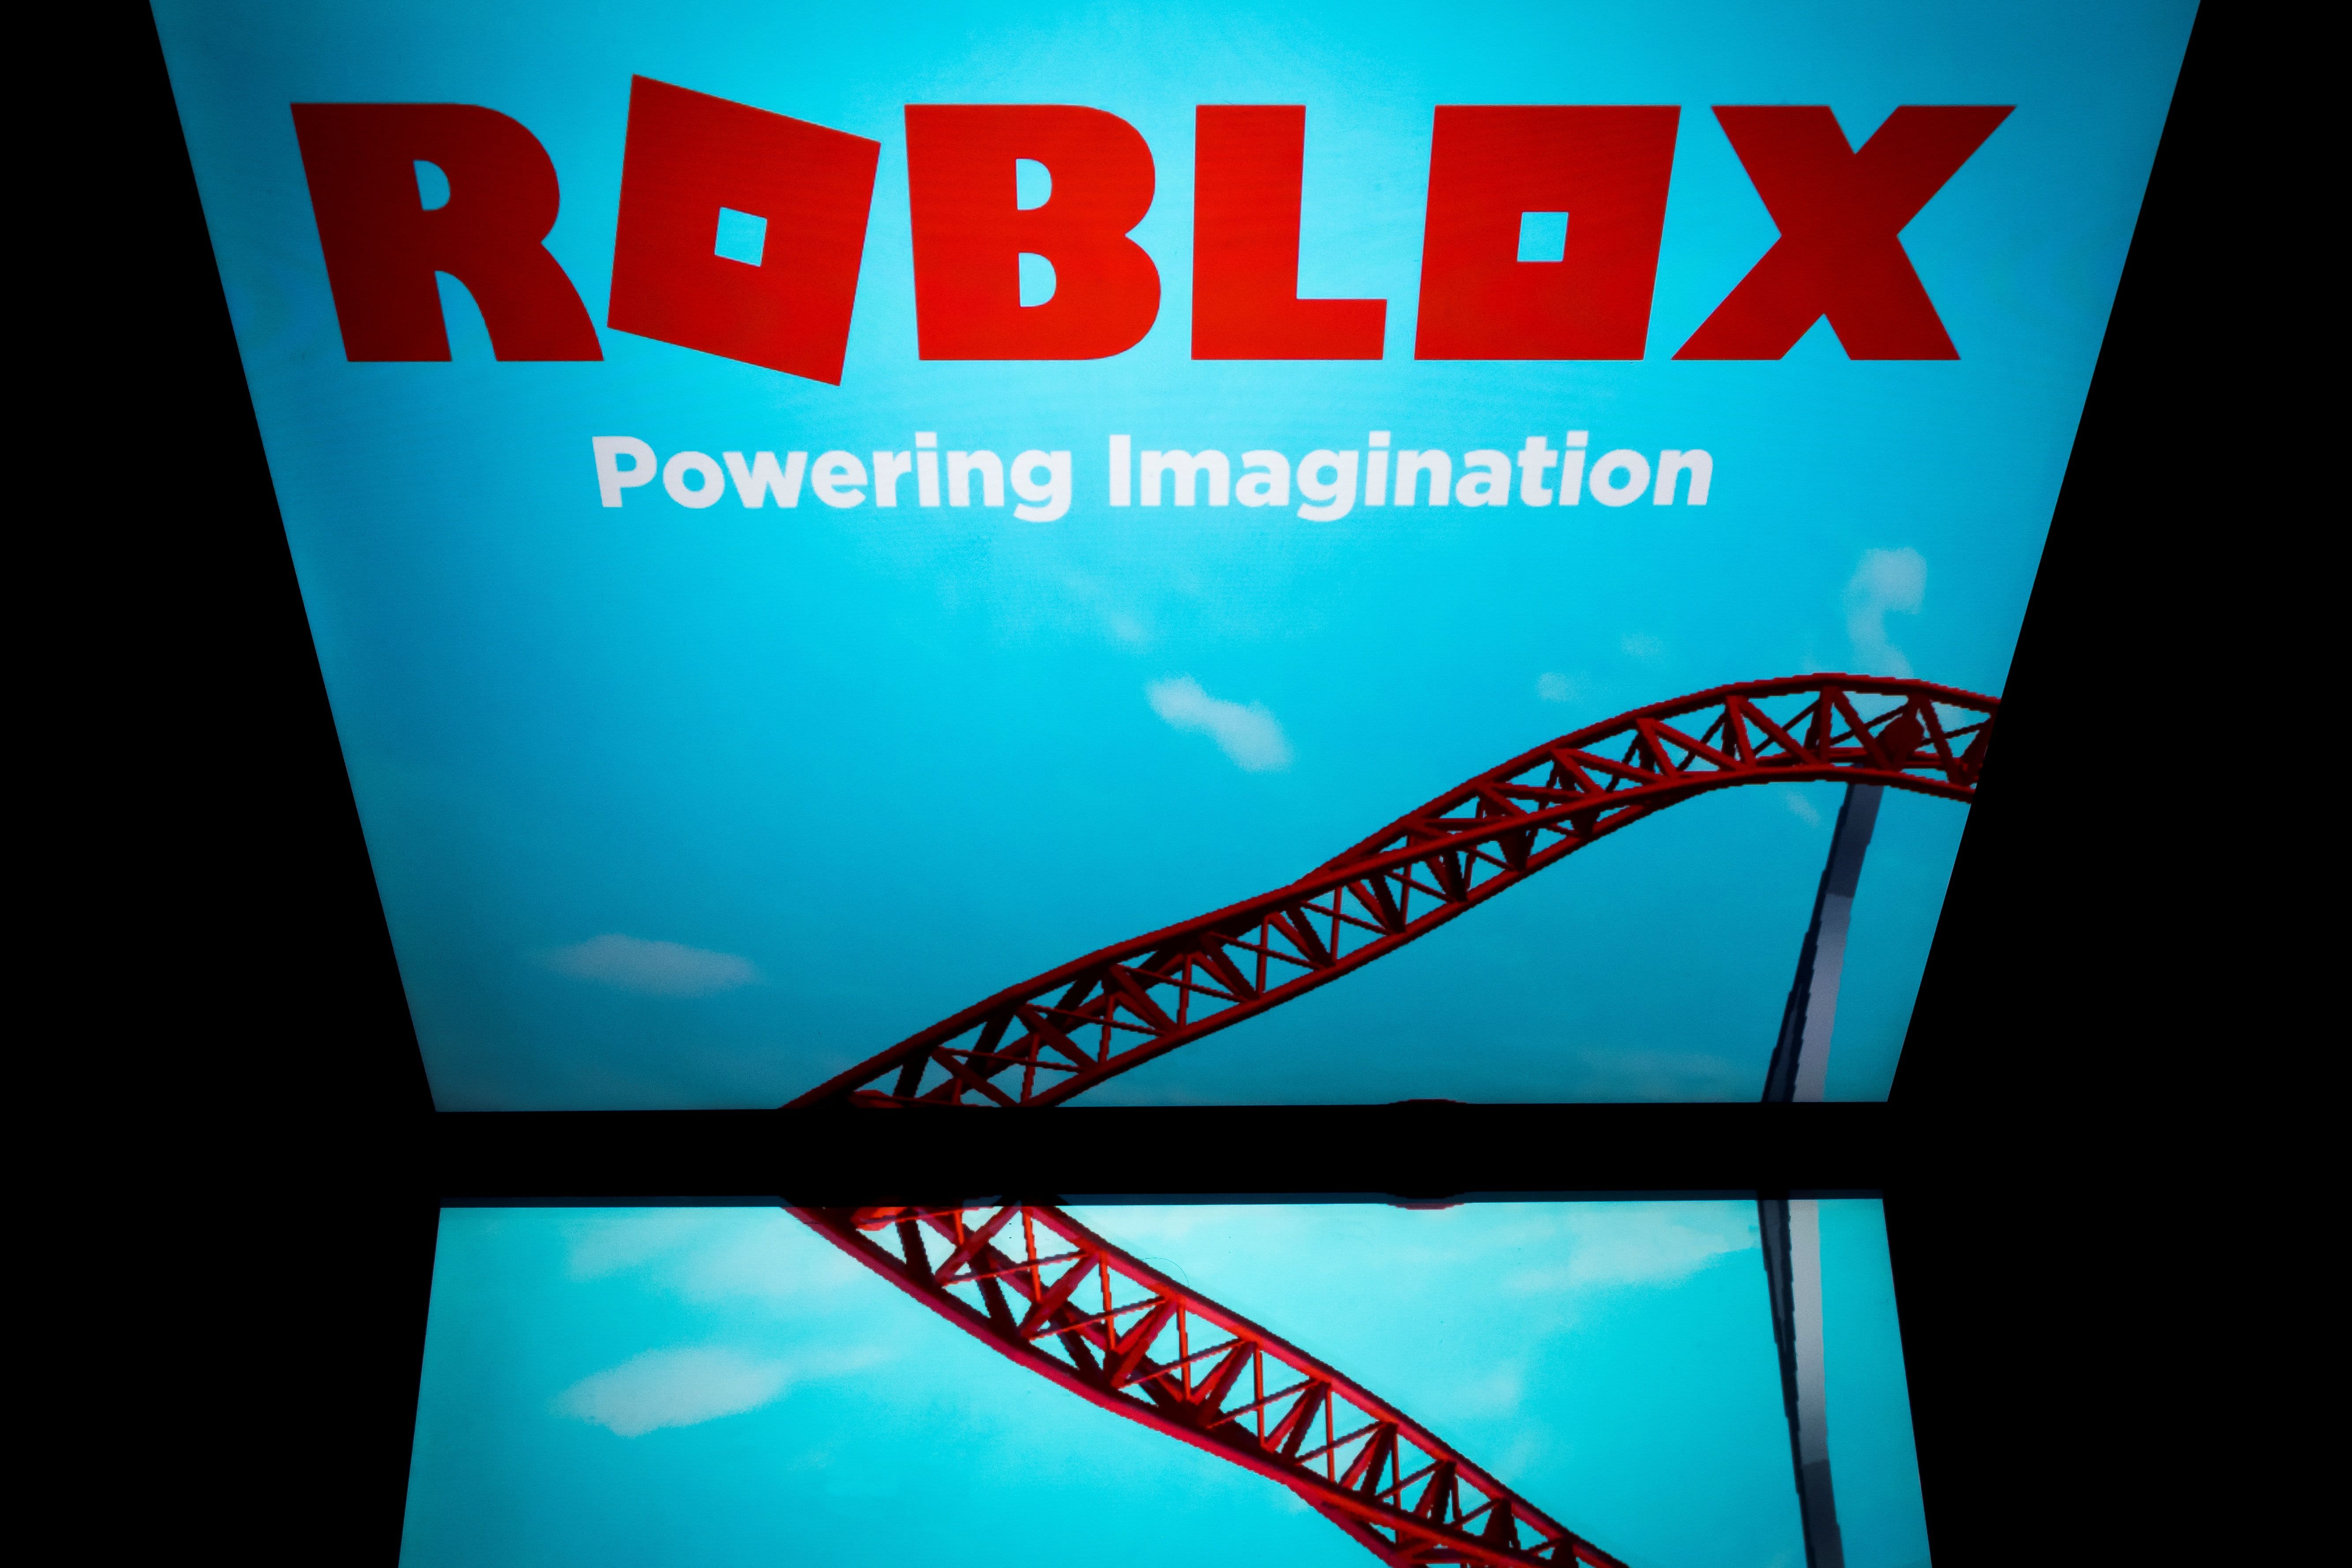 why did roblox shut down today